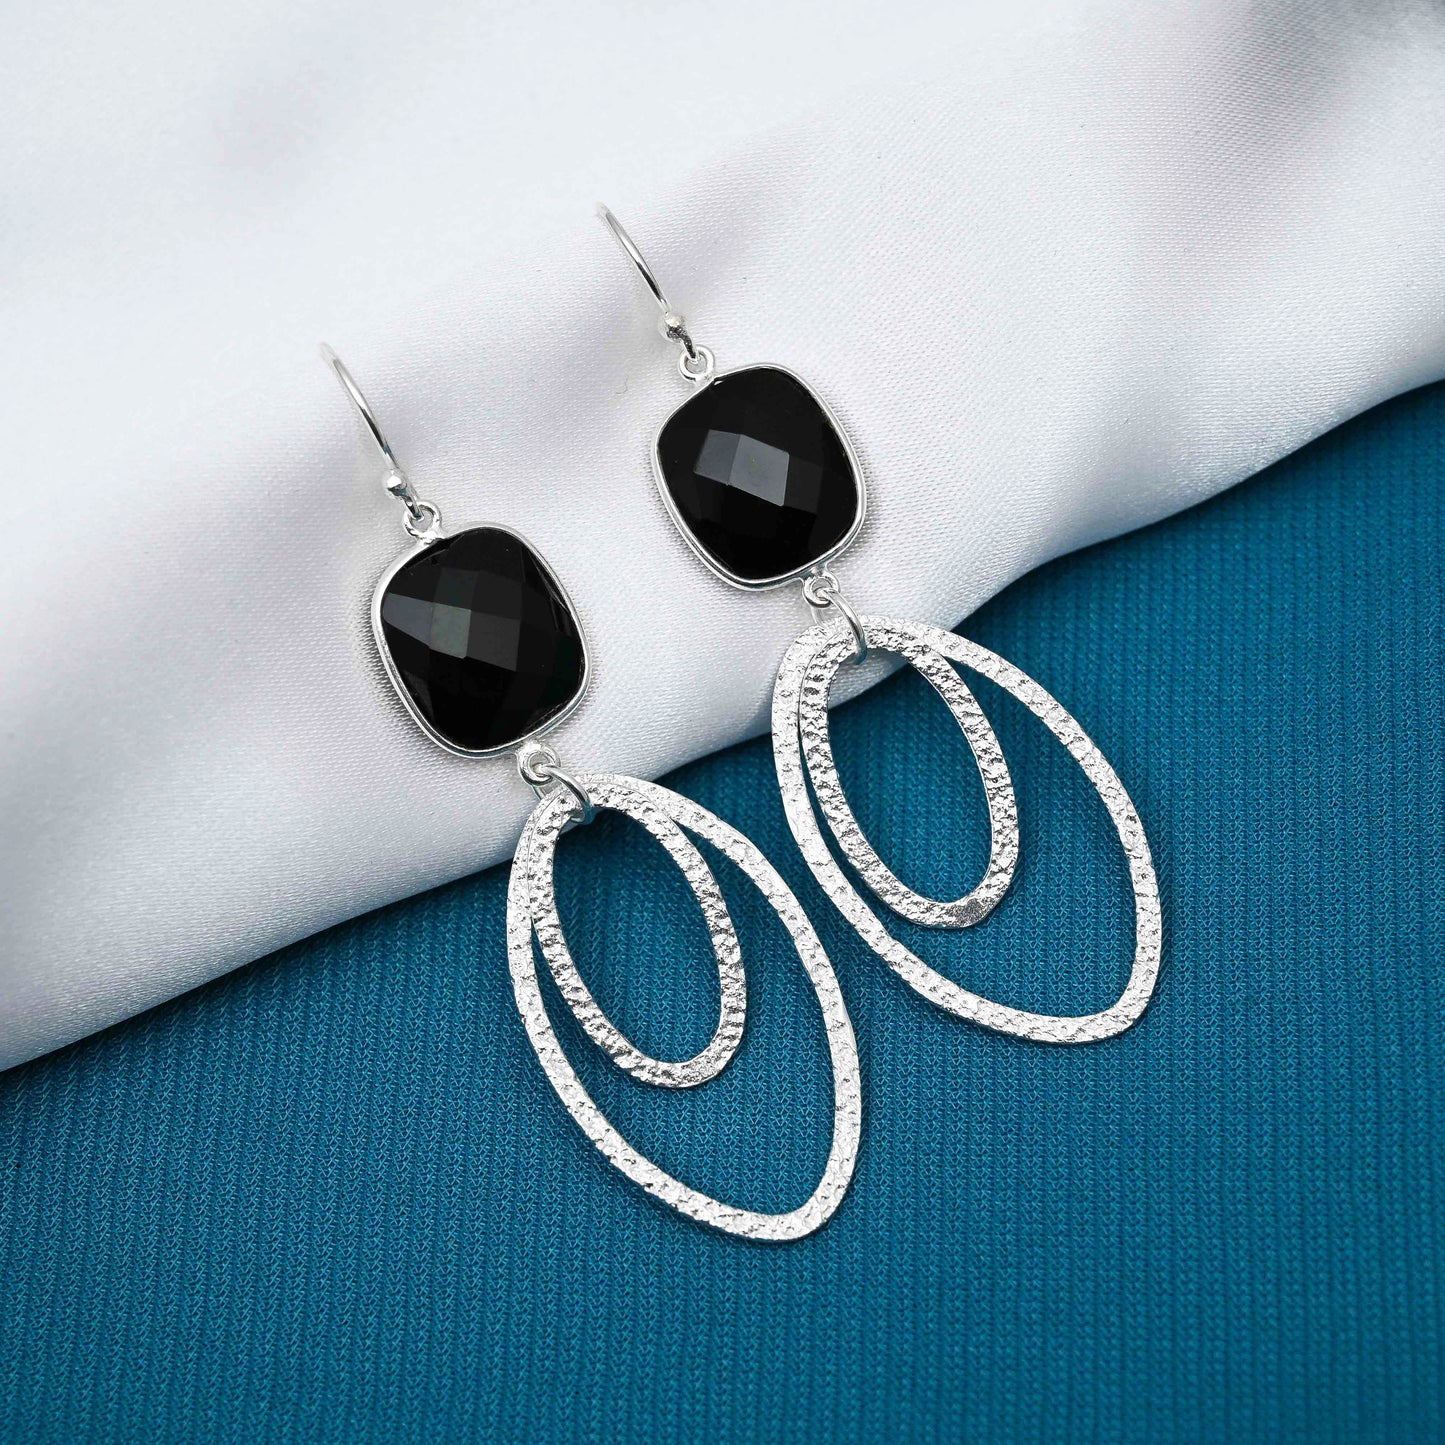 Ovate Silver Earrings with Black Onyx